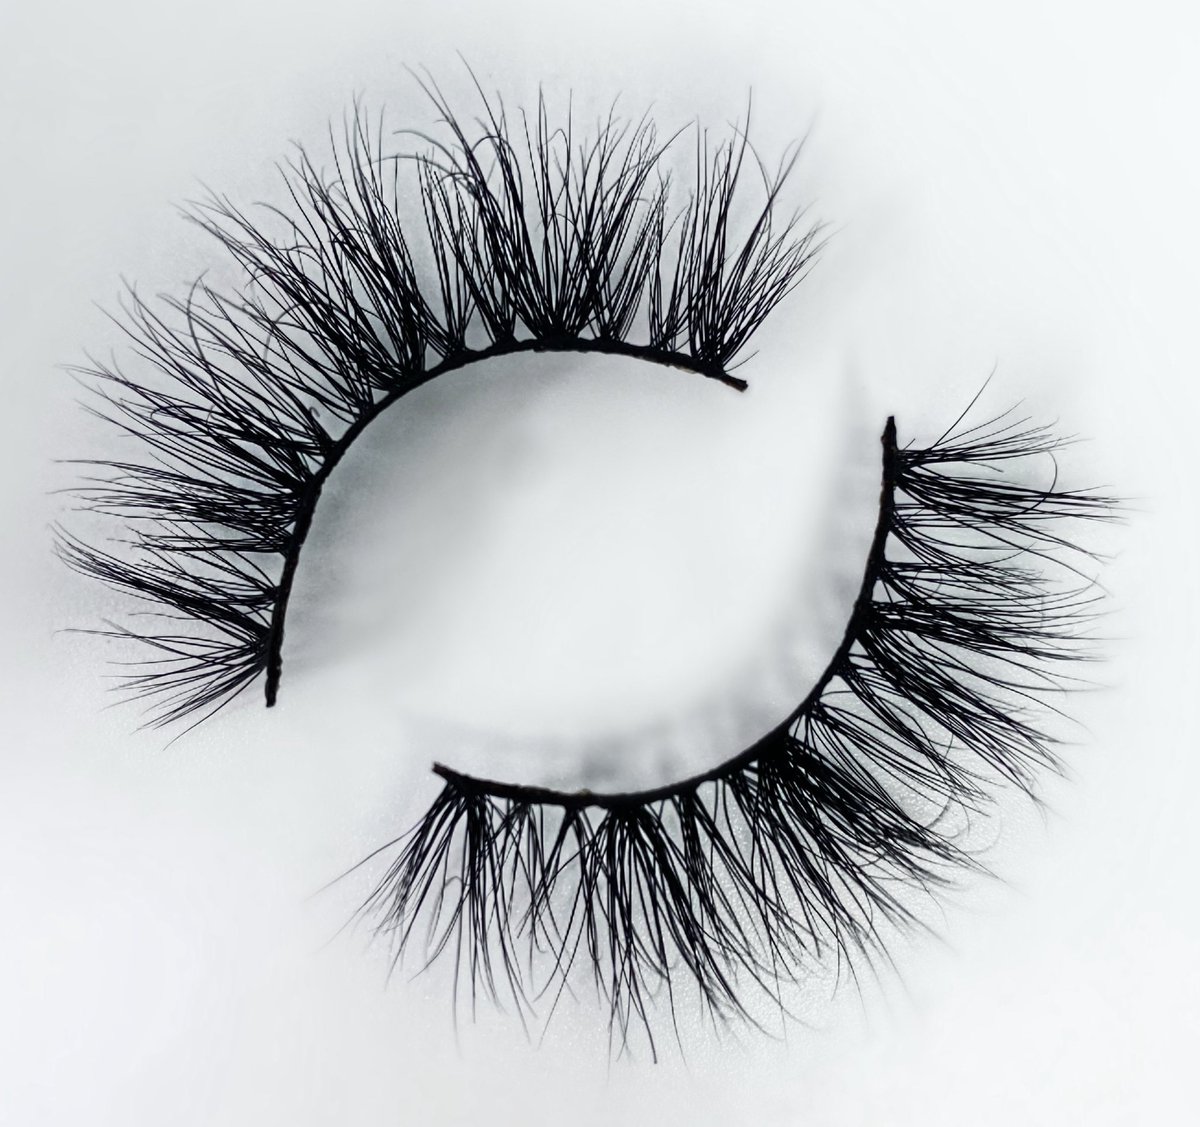 Now that you’re here. Shop my mink eyelashes   http://klynluxe.com  & follow me on IG @ klynluxe 